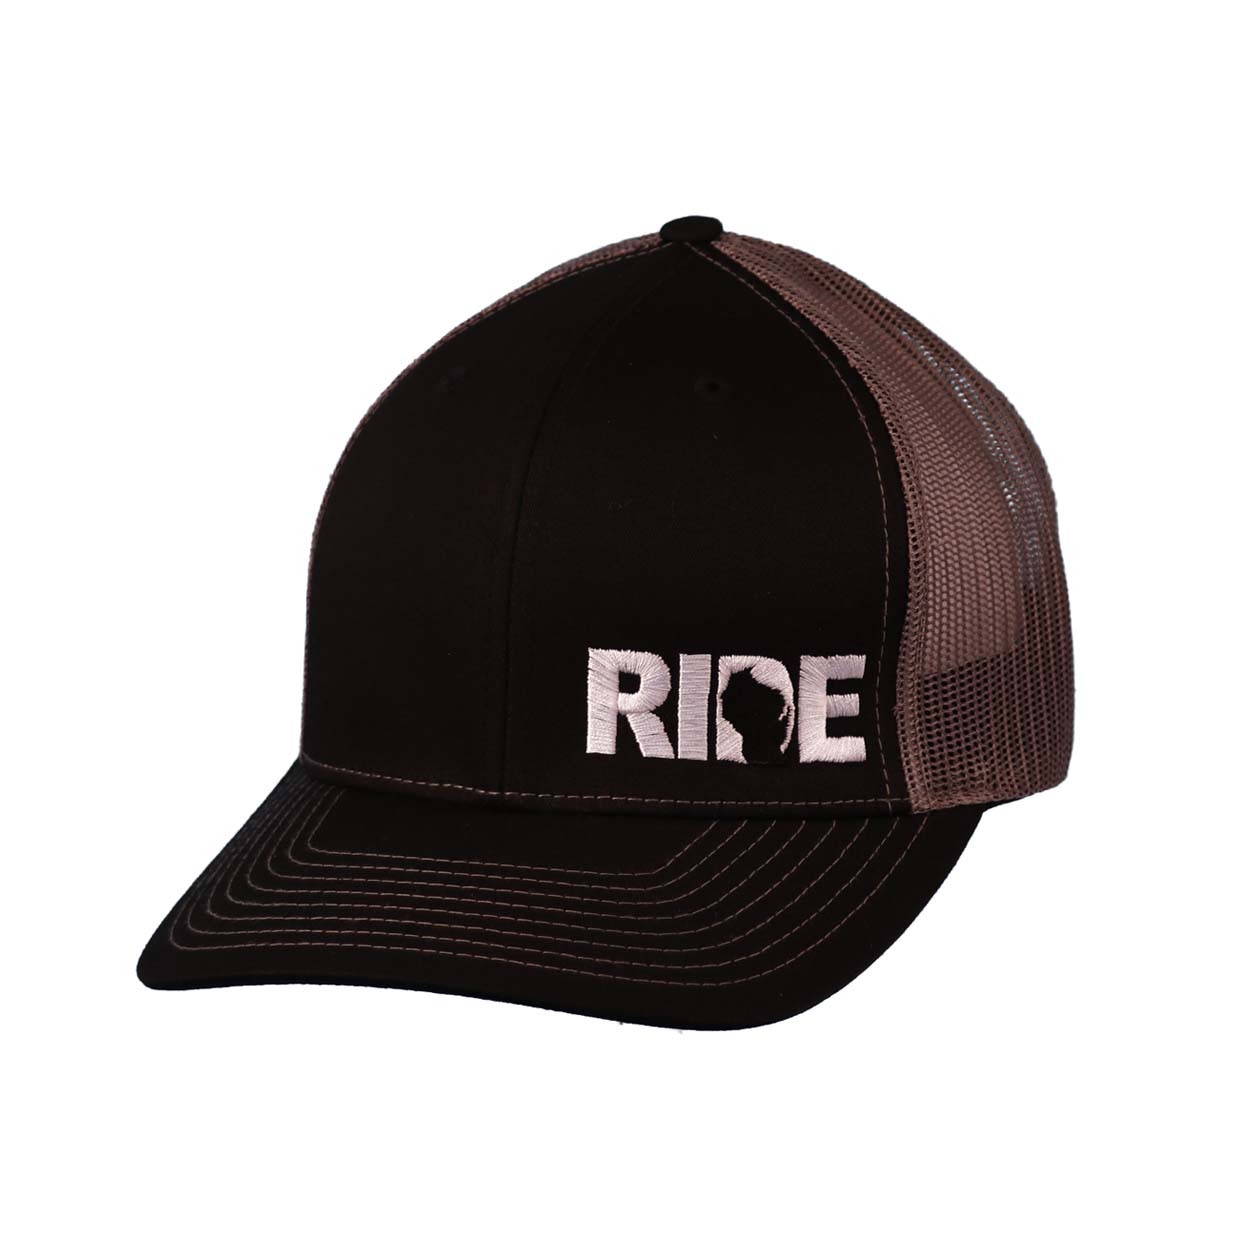 Ride Wisconsin Night Out Embroidered Snapback Trucker Hat Black/Charcoal